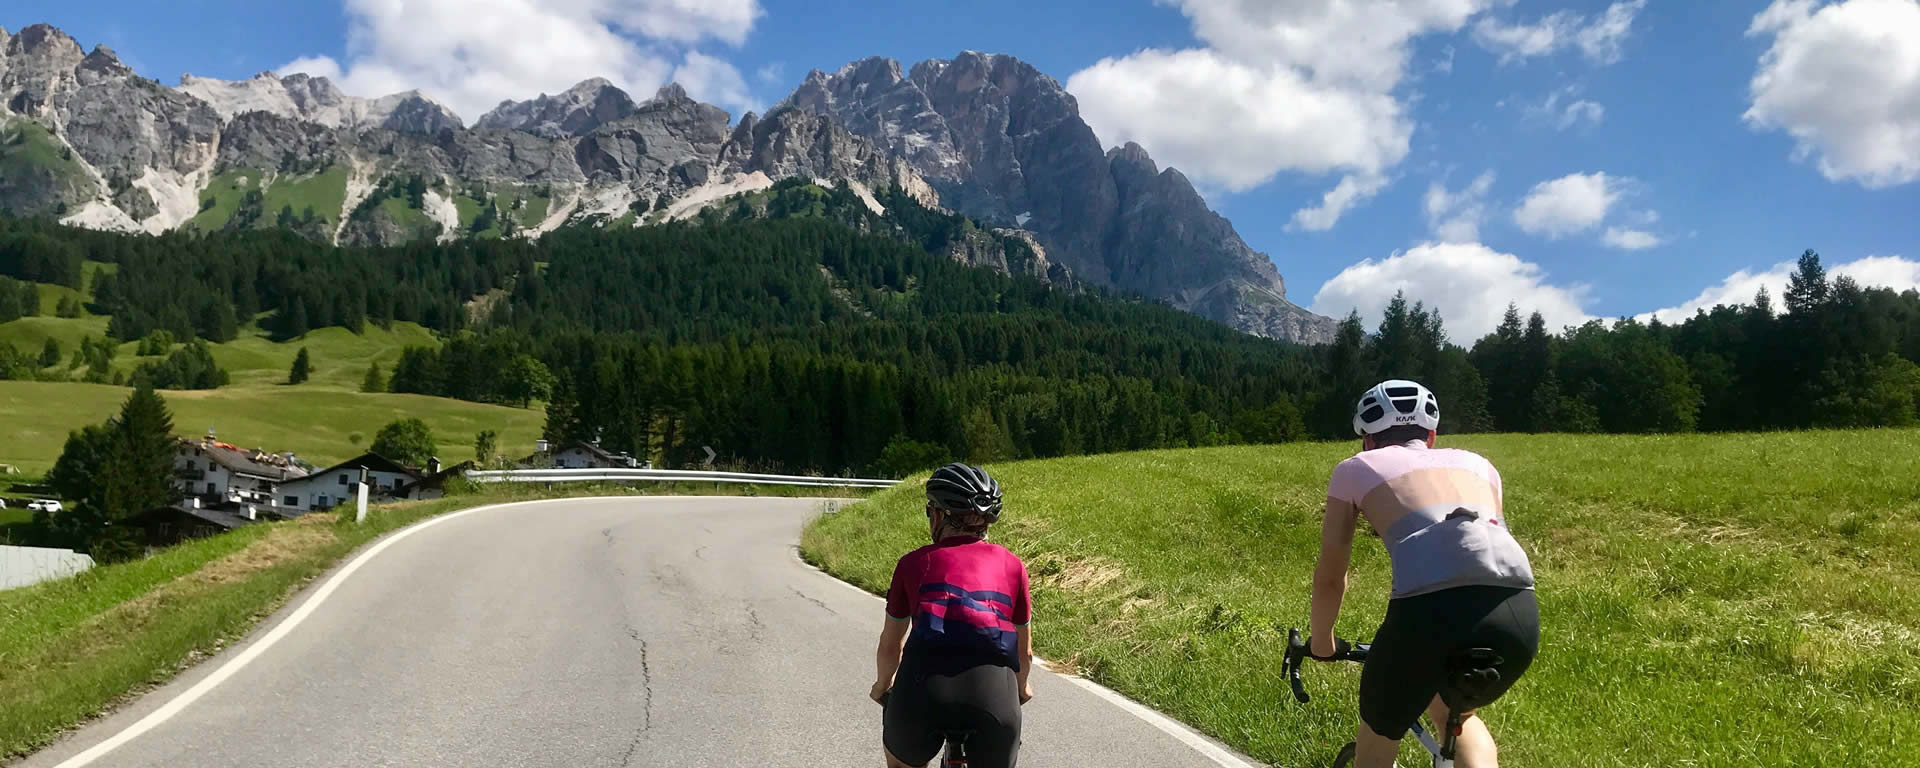 Climbing in the Dolomites above Cortina